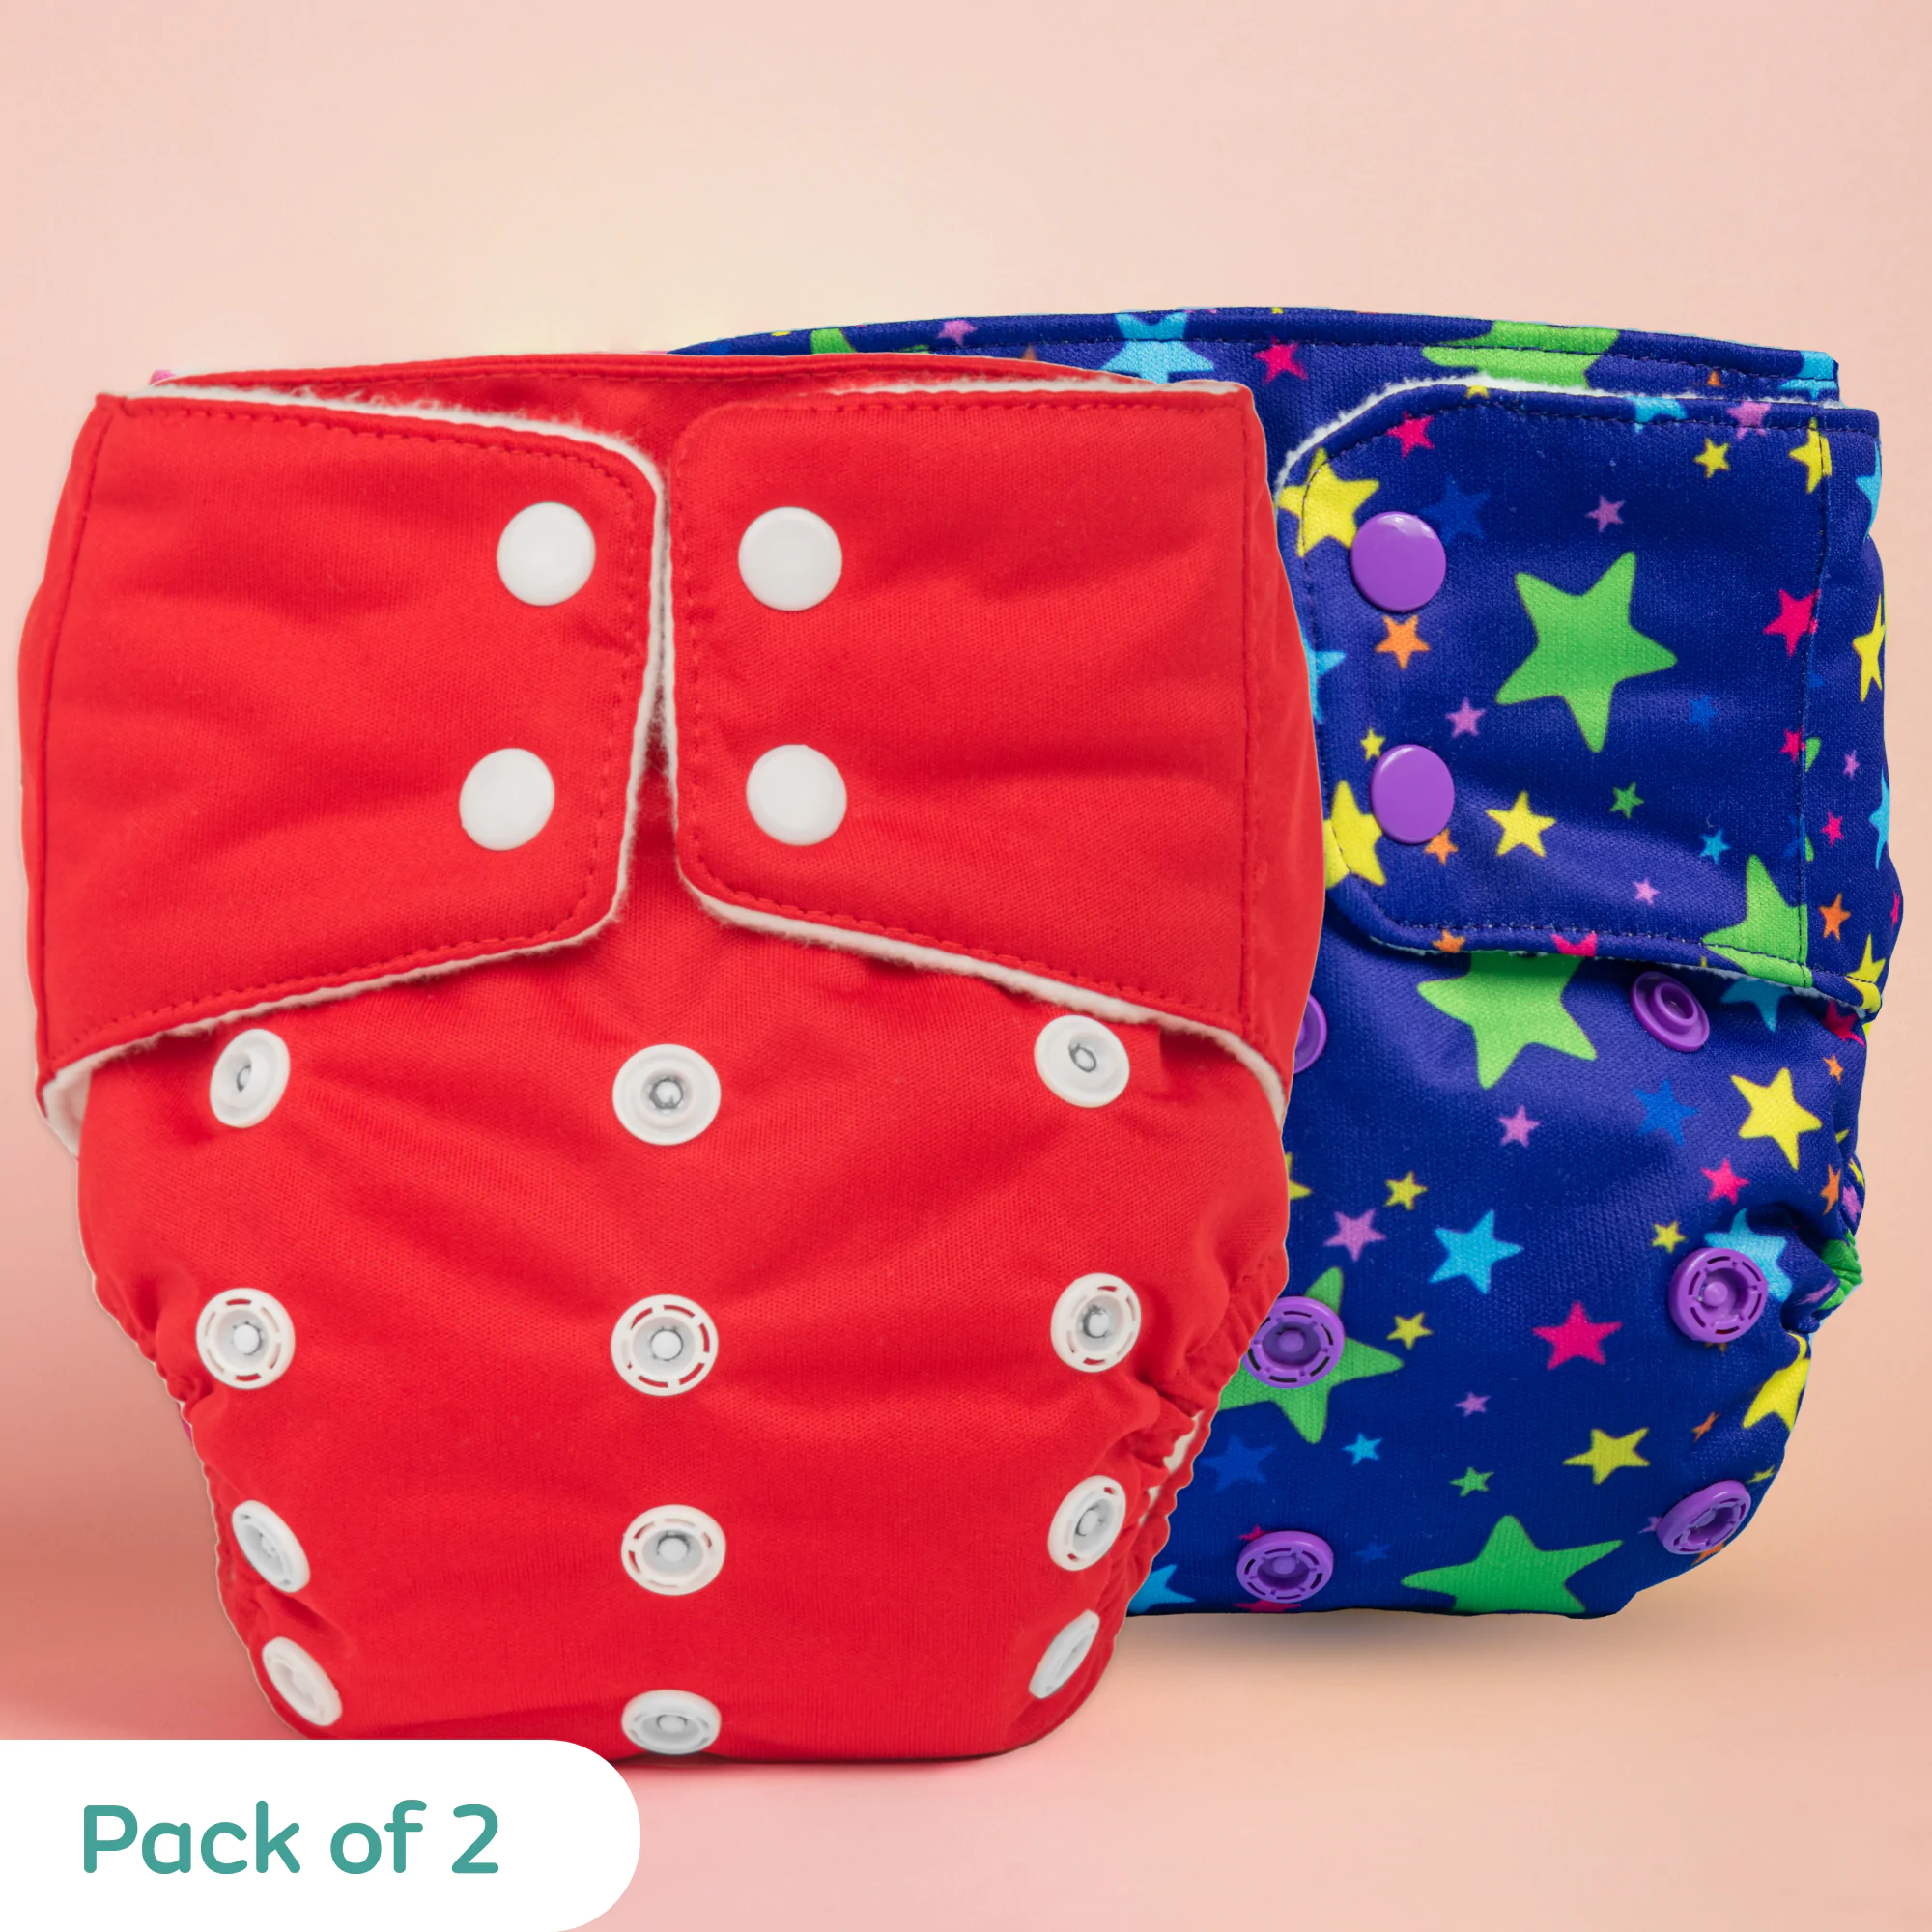 Free Size Washable & Reusable Cloth Diaper With 2 Dry Feel Absorbent Insert Pad ( 3 M - 3 Yrs) - Twinkle print -Red Solid